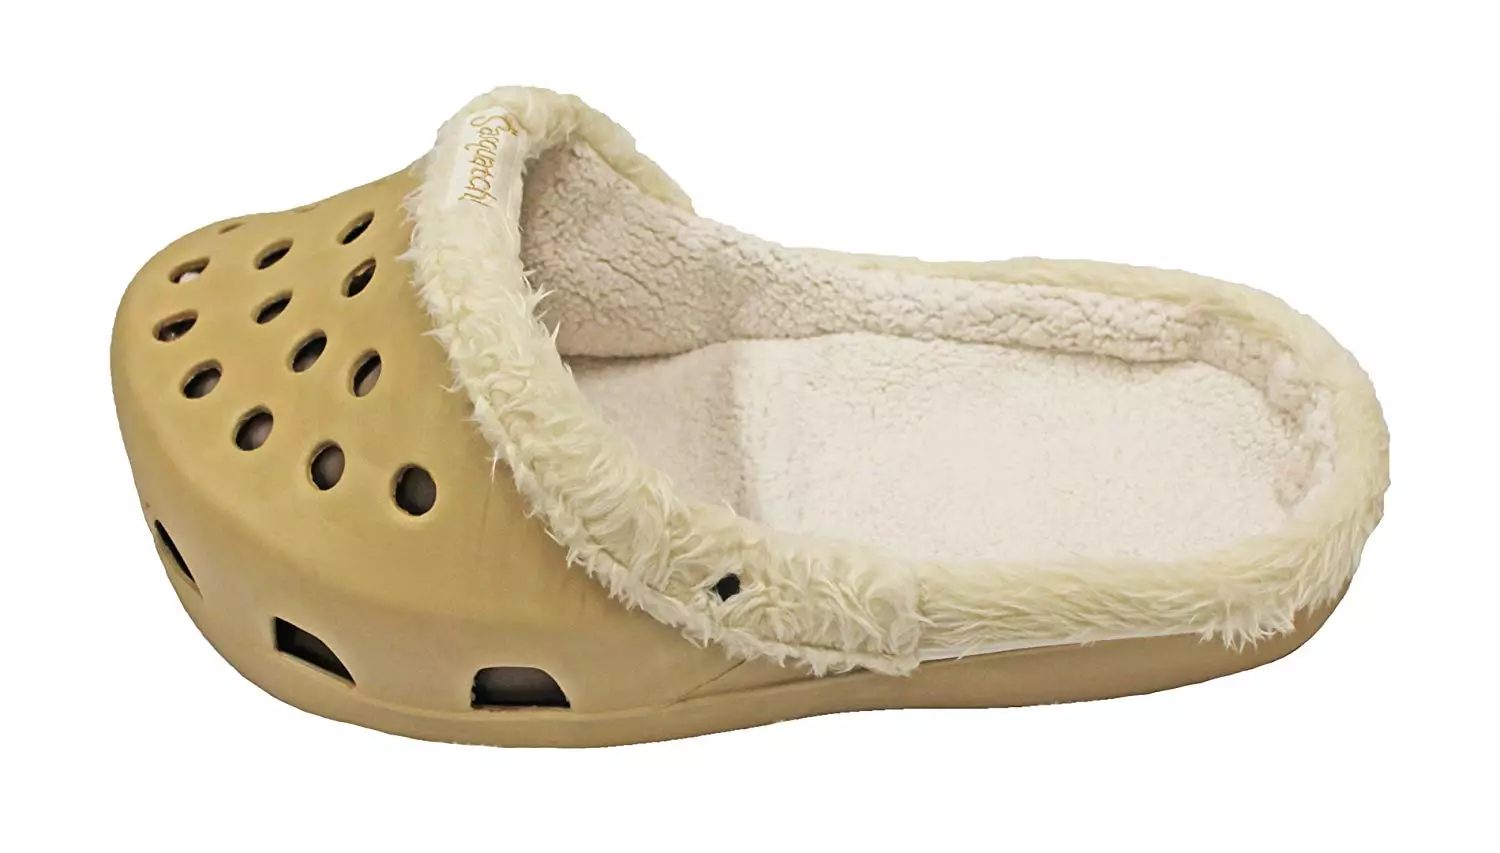 The slipper shaped beds are perfect for any pet who likes to keep cosy. (